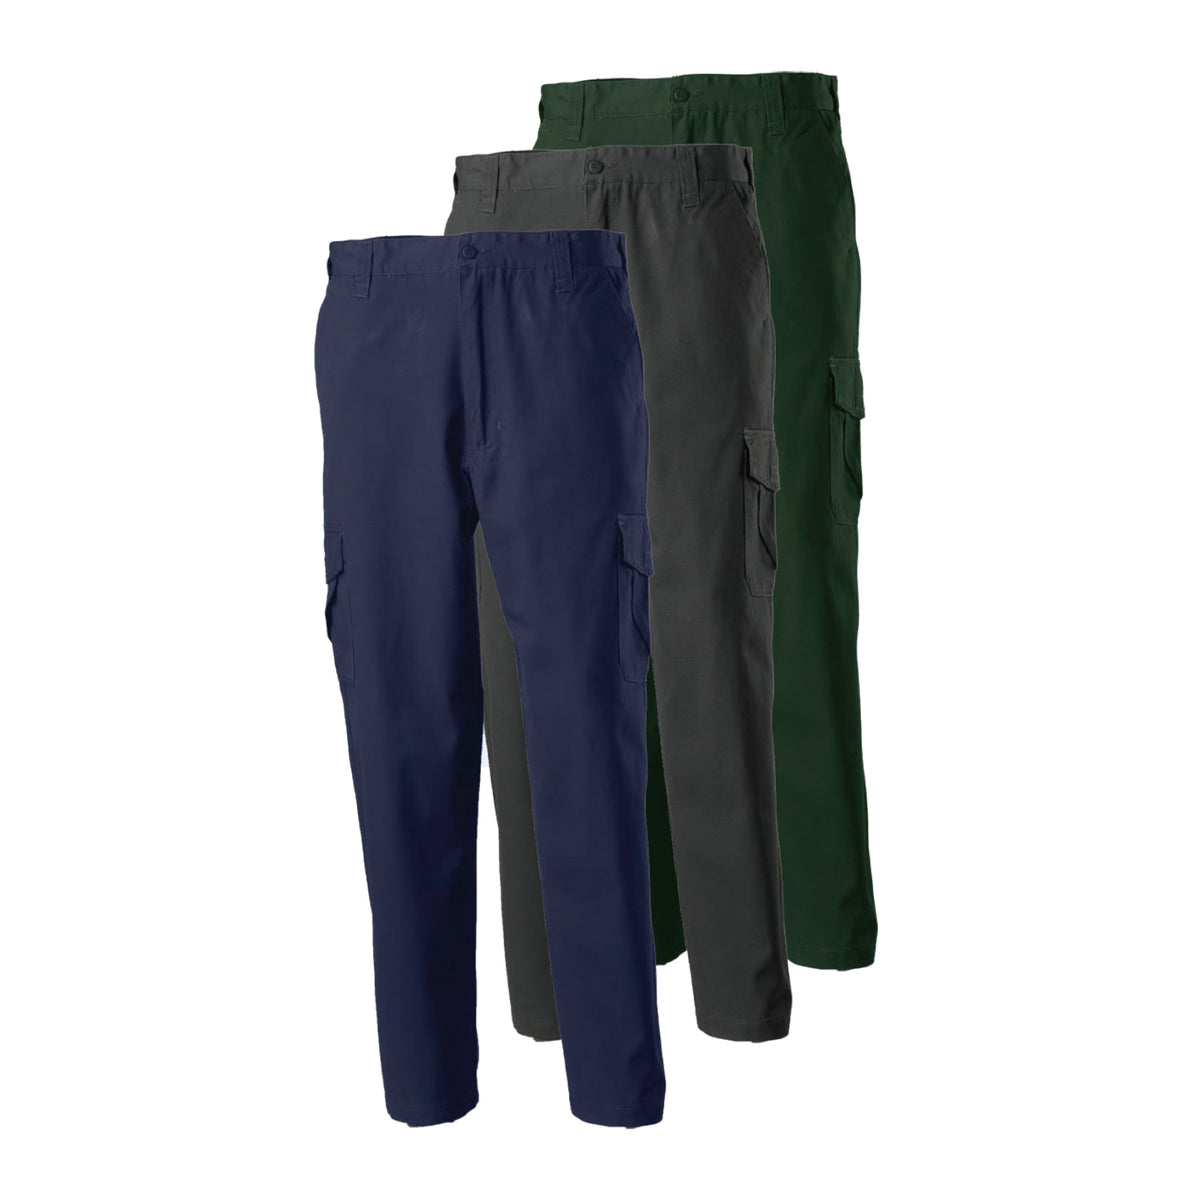 mid weight cotton cargo trousers in navy, green and black